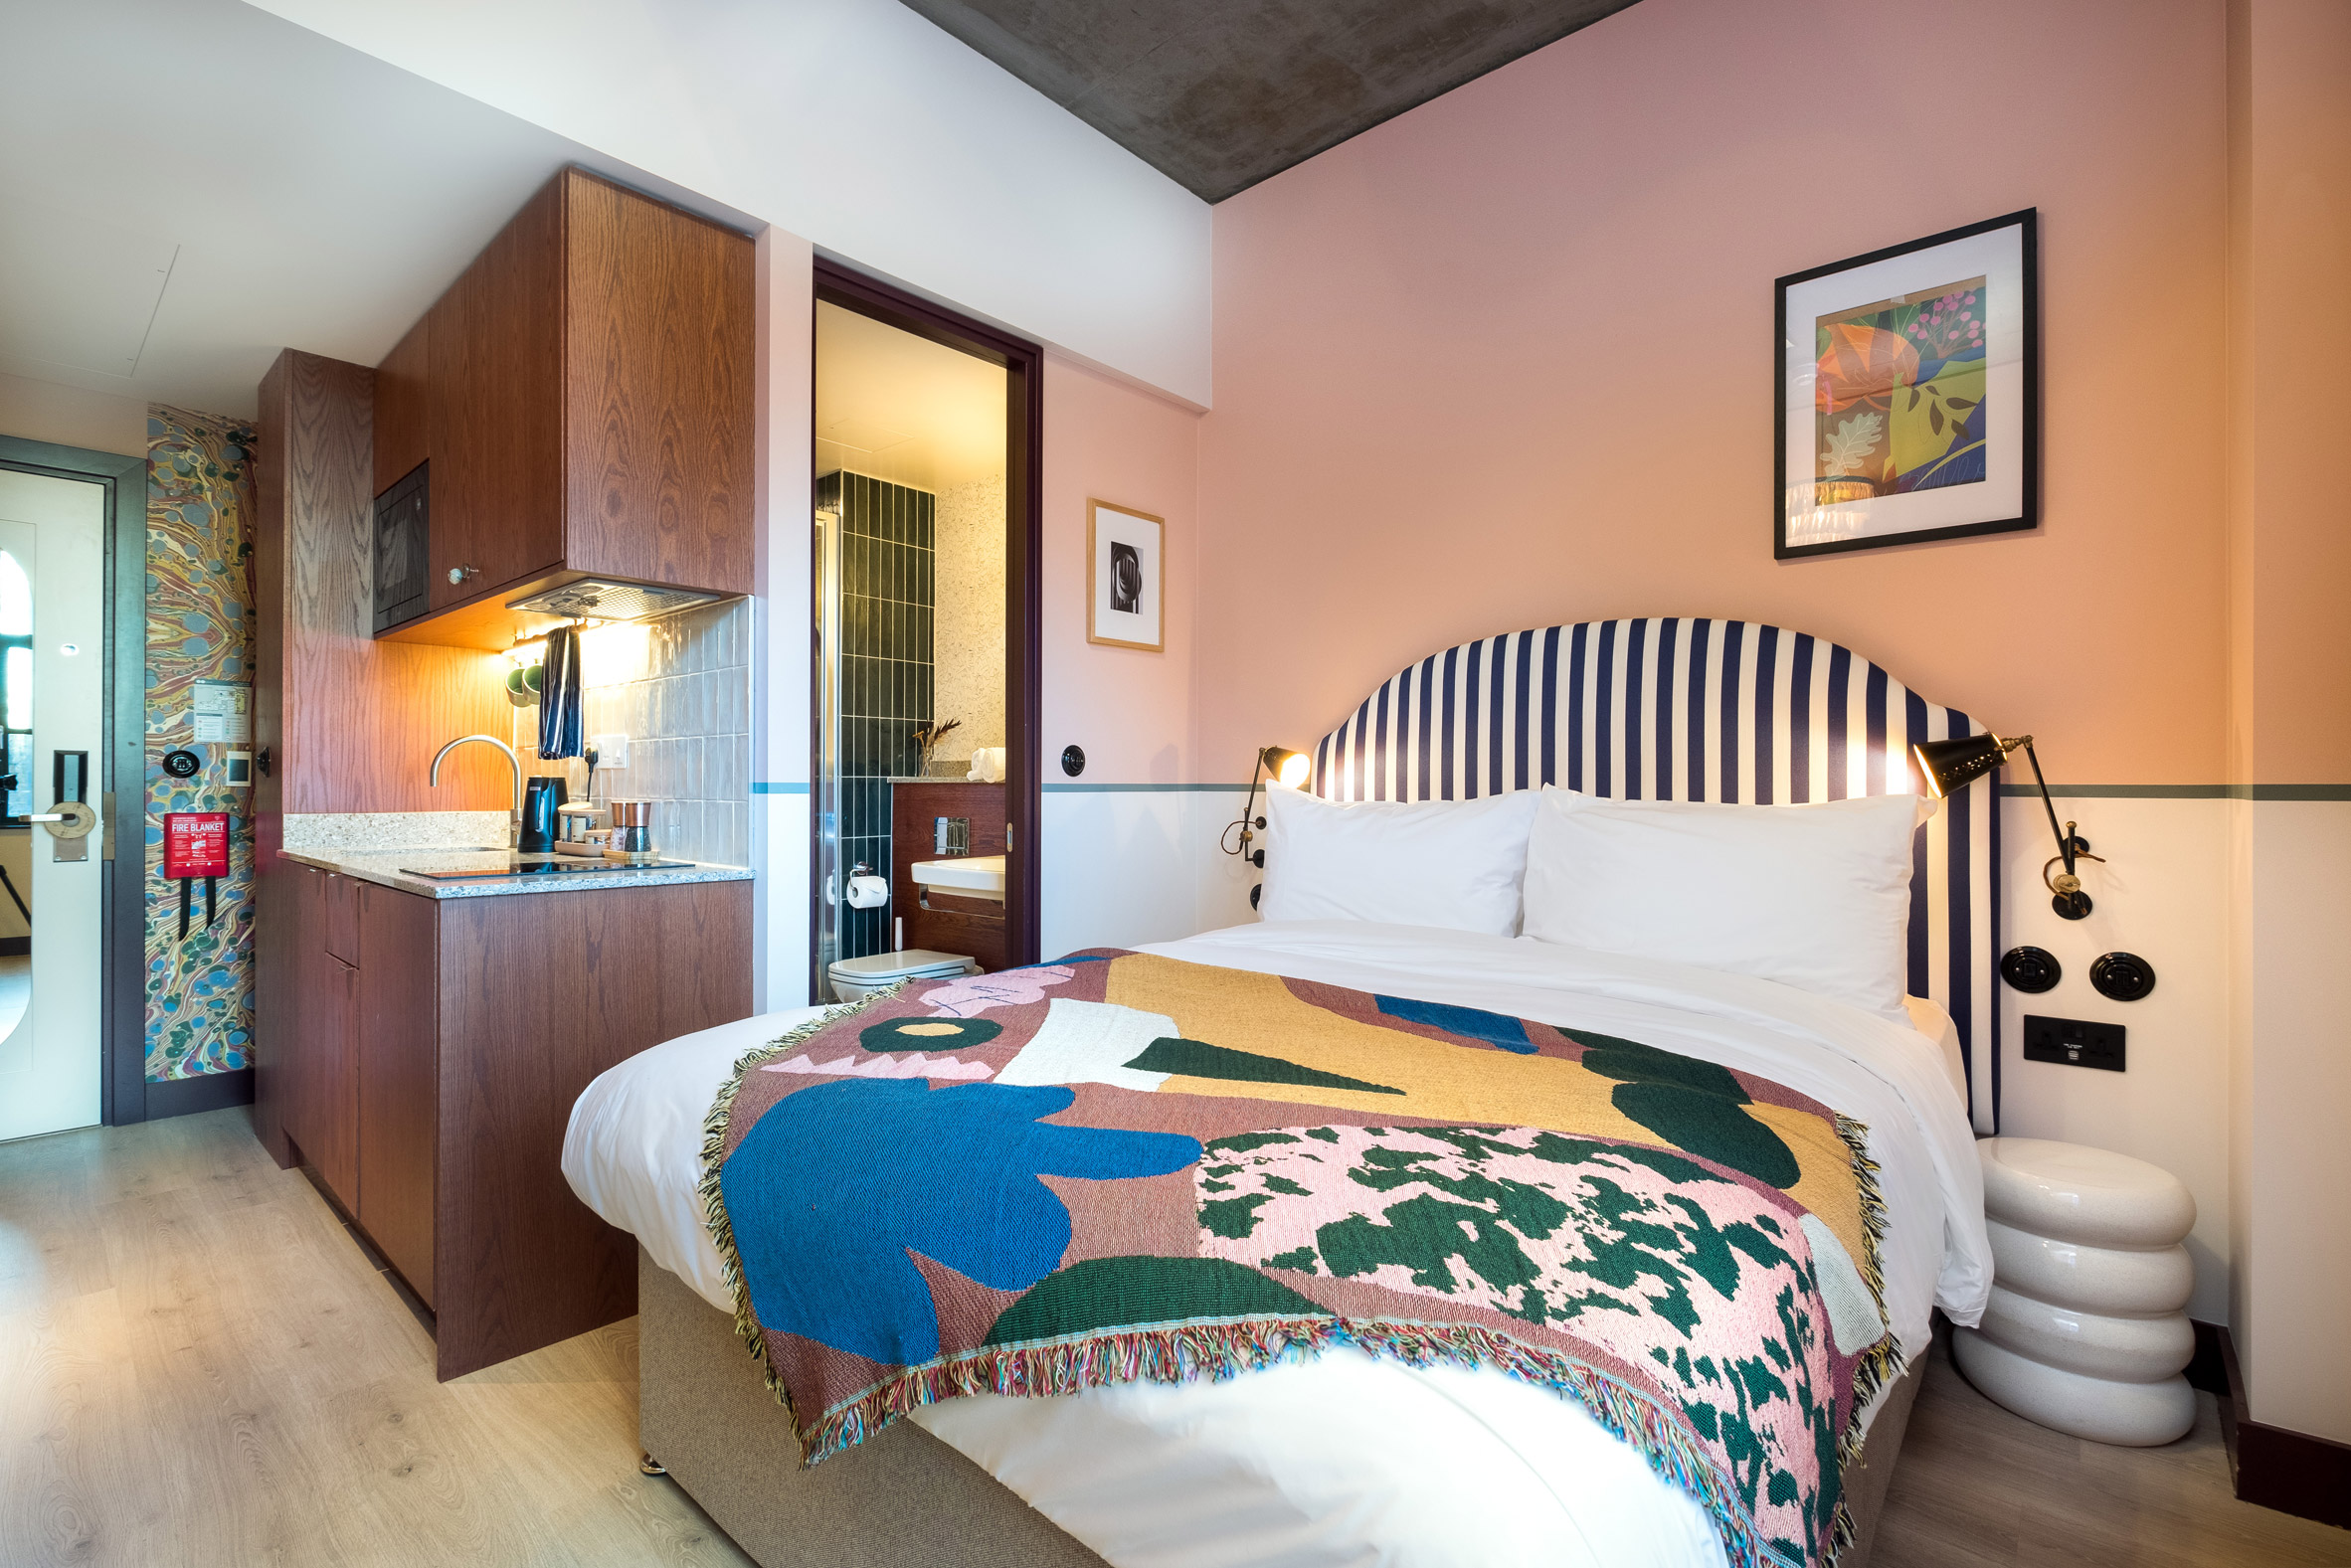 Hotel room with wooden kitchenette, pink walls and colourful throw over double bed